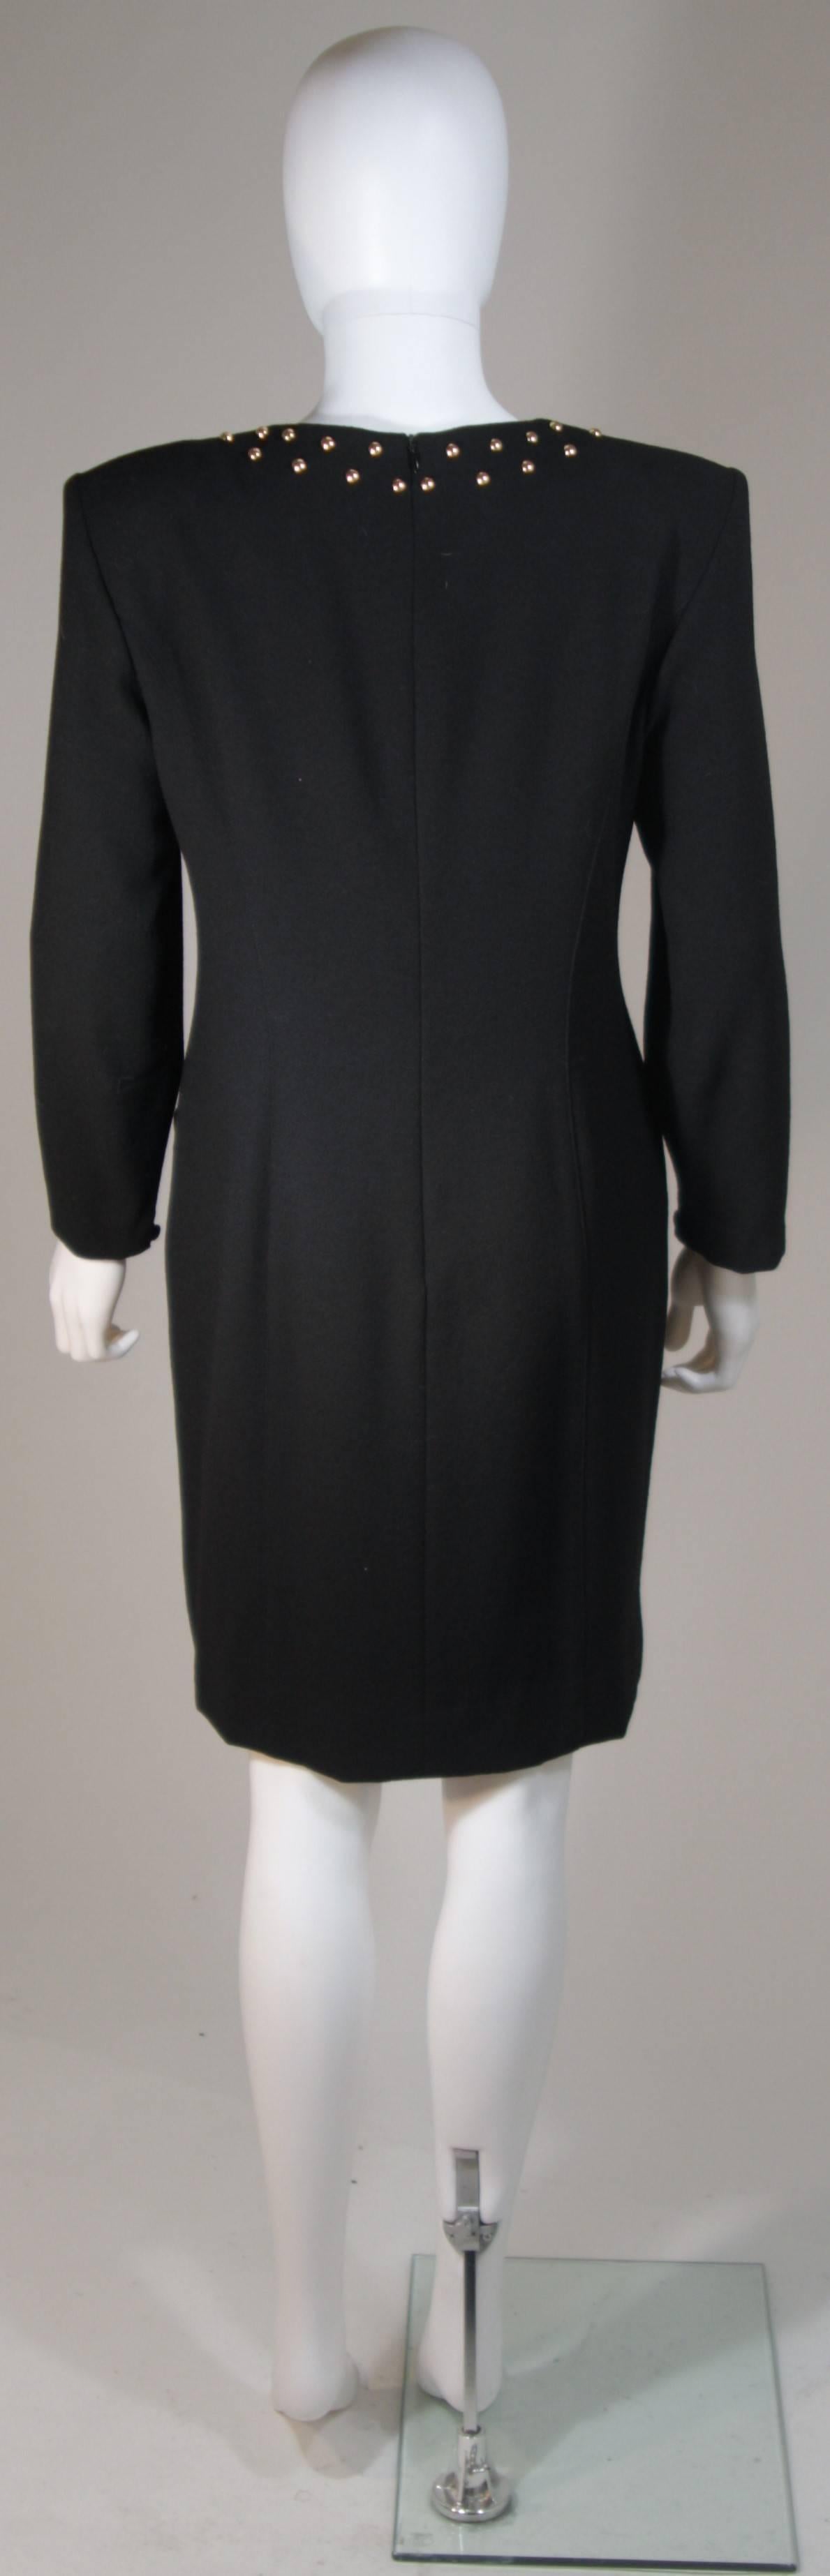 GUY LAROCHE Black Cocktail Dress with Stud Applique Size Large For Sale 4